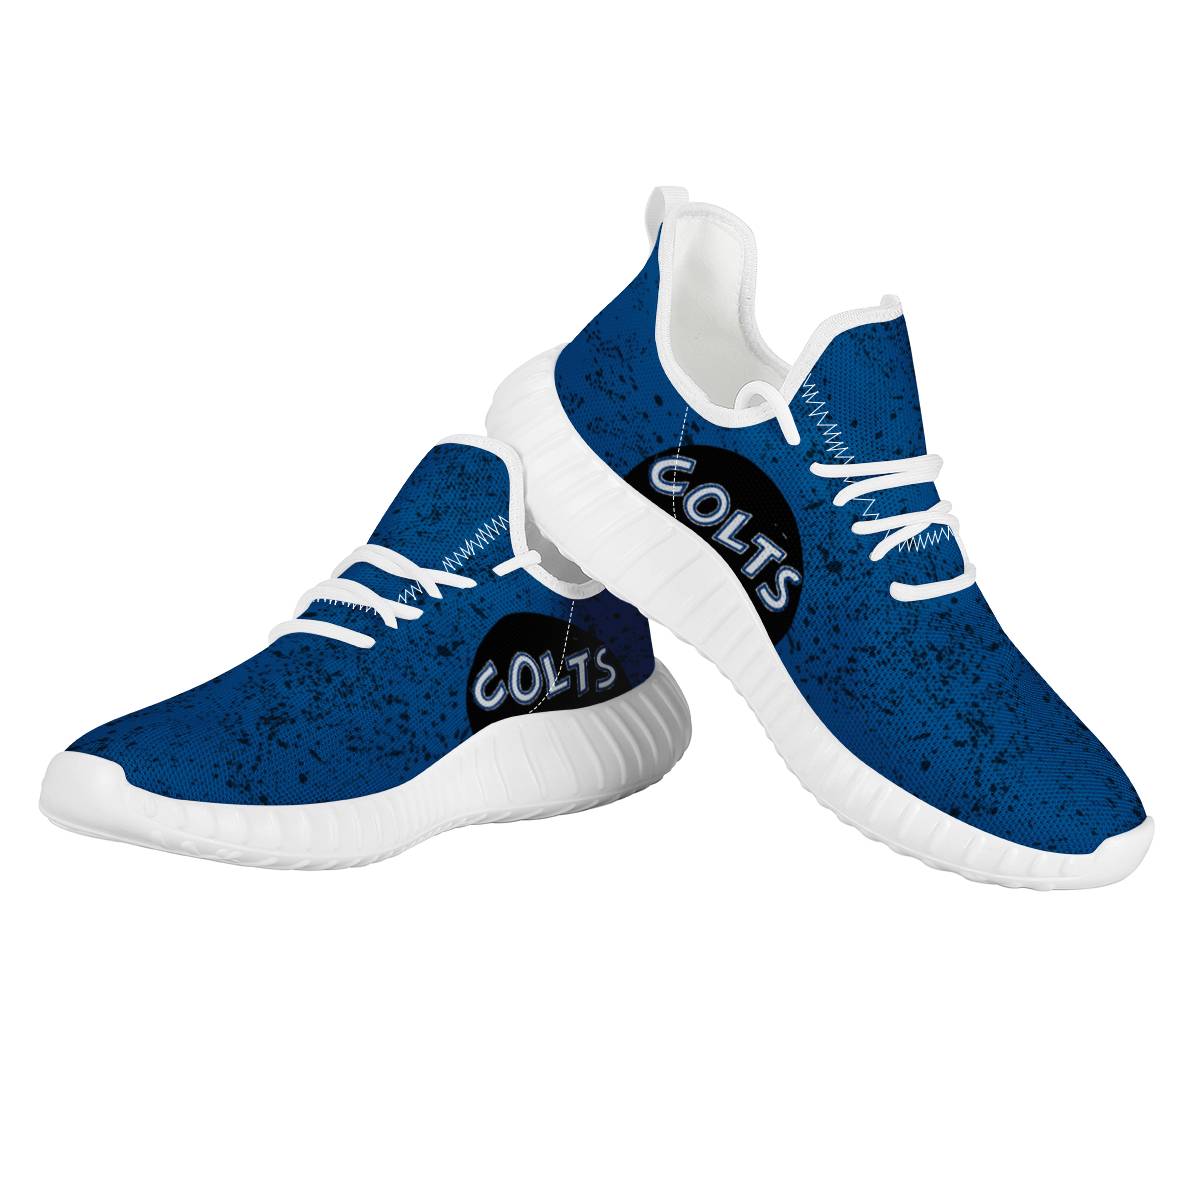 Women's Indianapolis Colts Mesh Knit Sneakers/Shoes 009